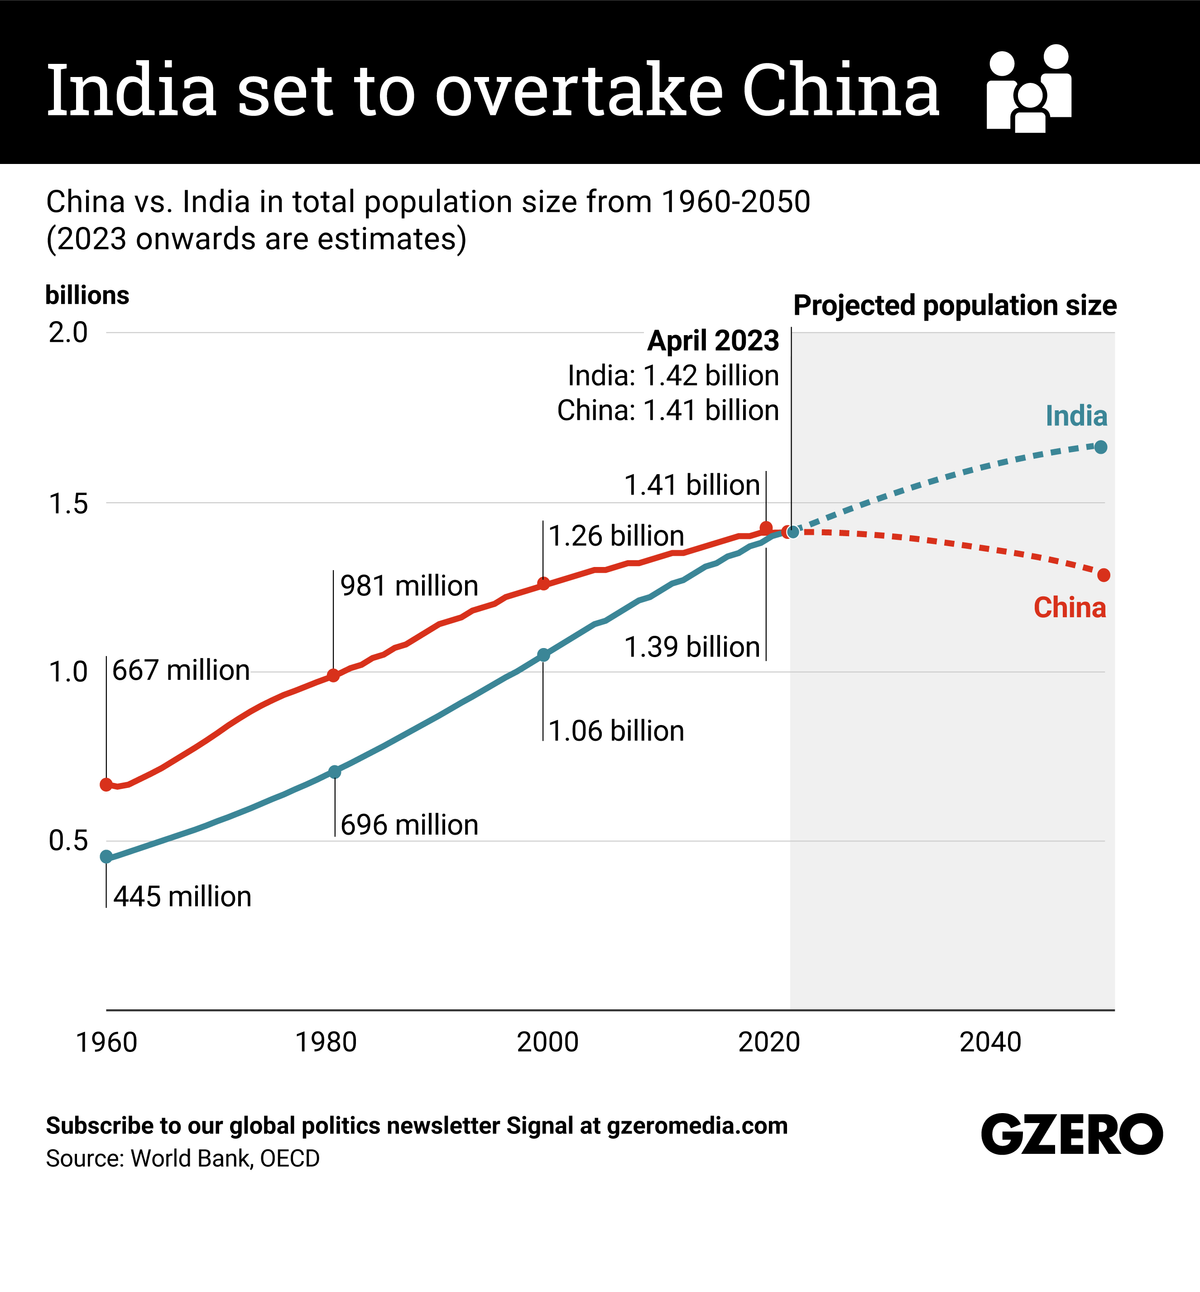 Line chart comparing Chinese to Indian population growth over time